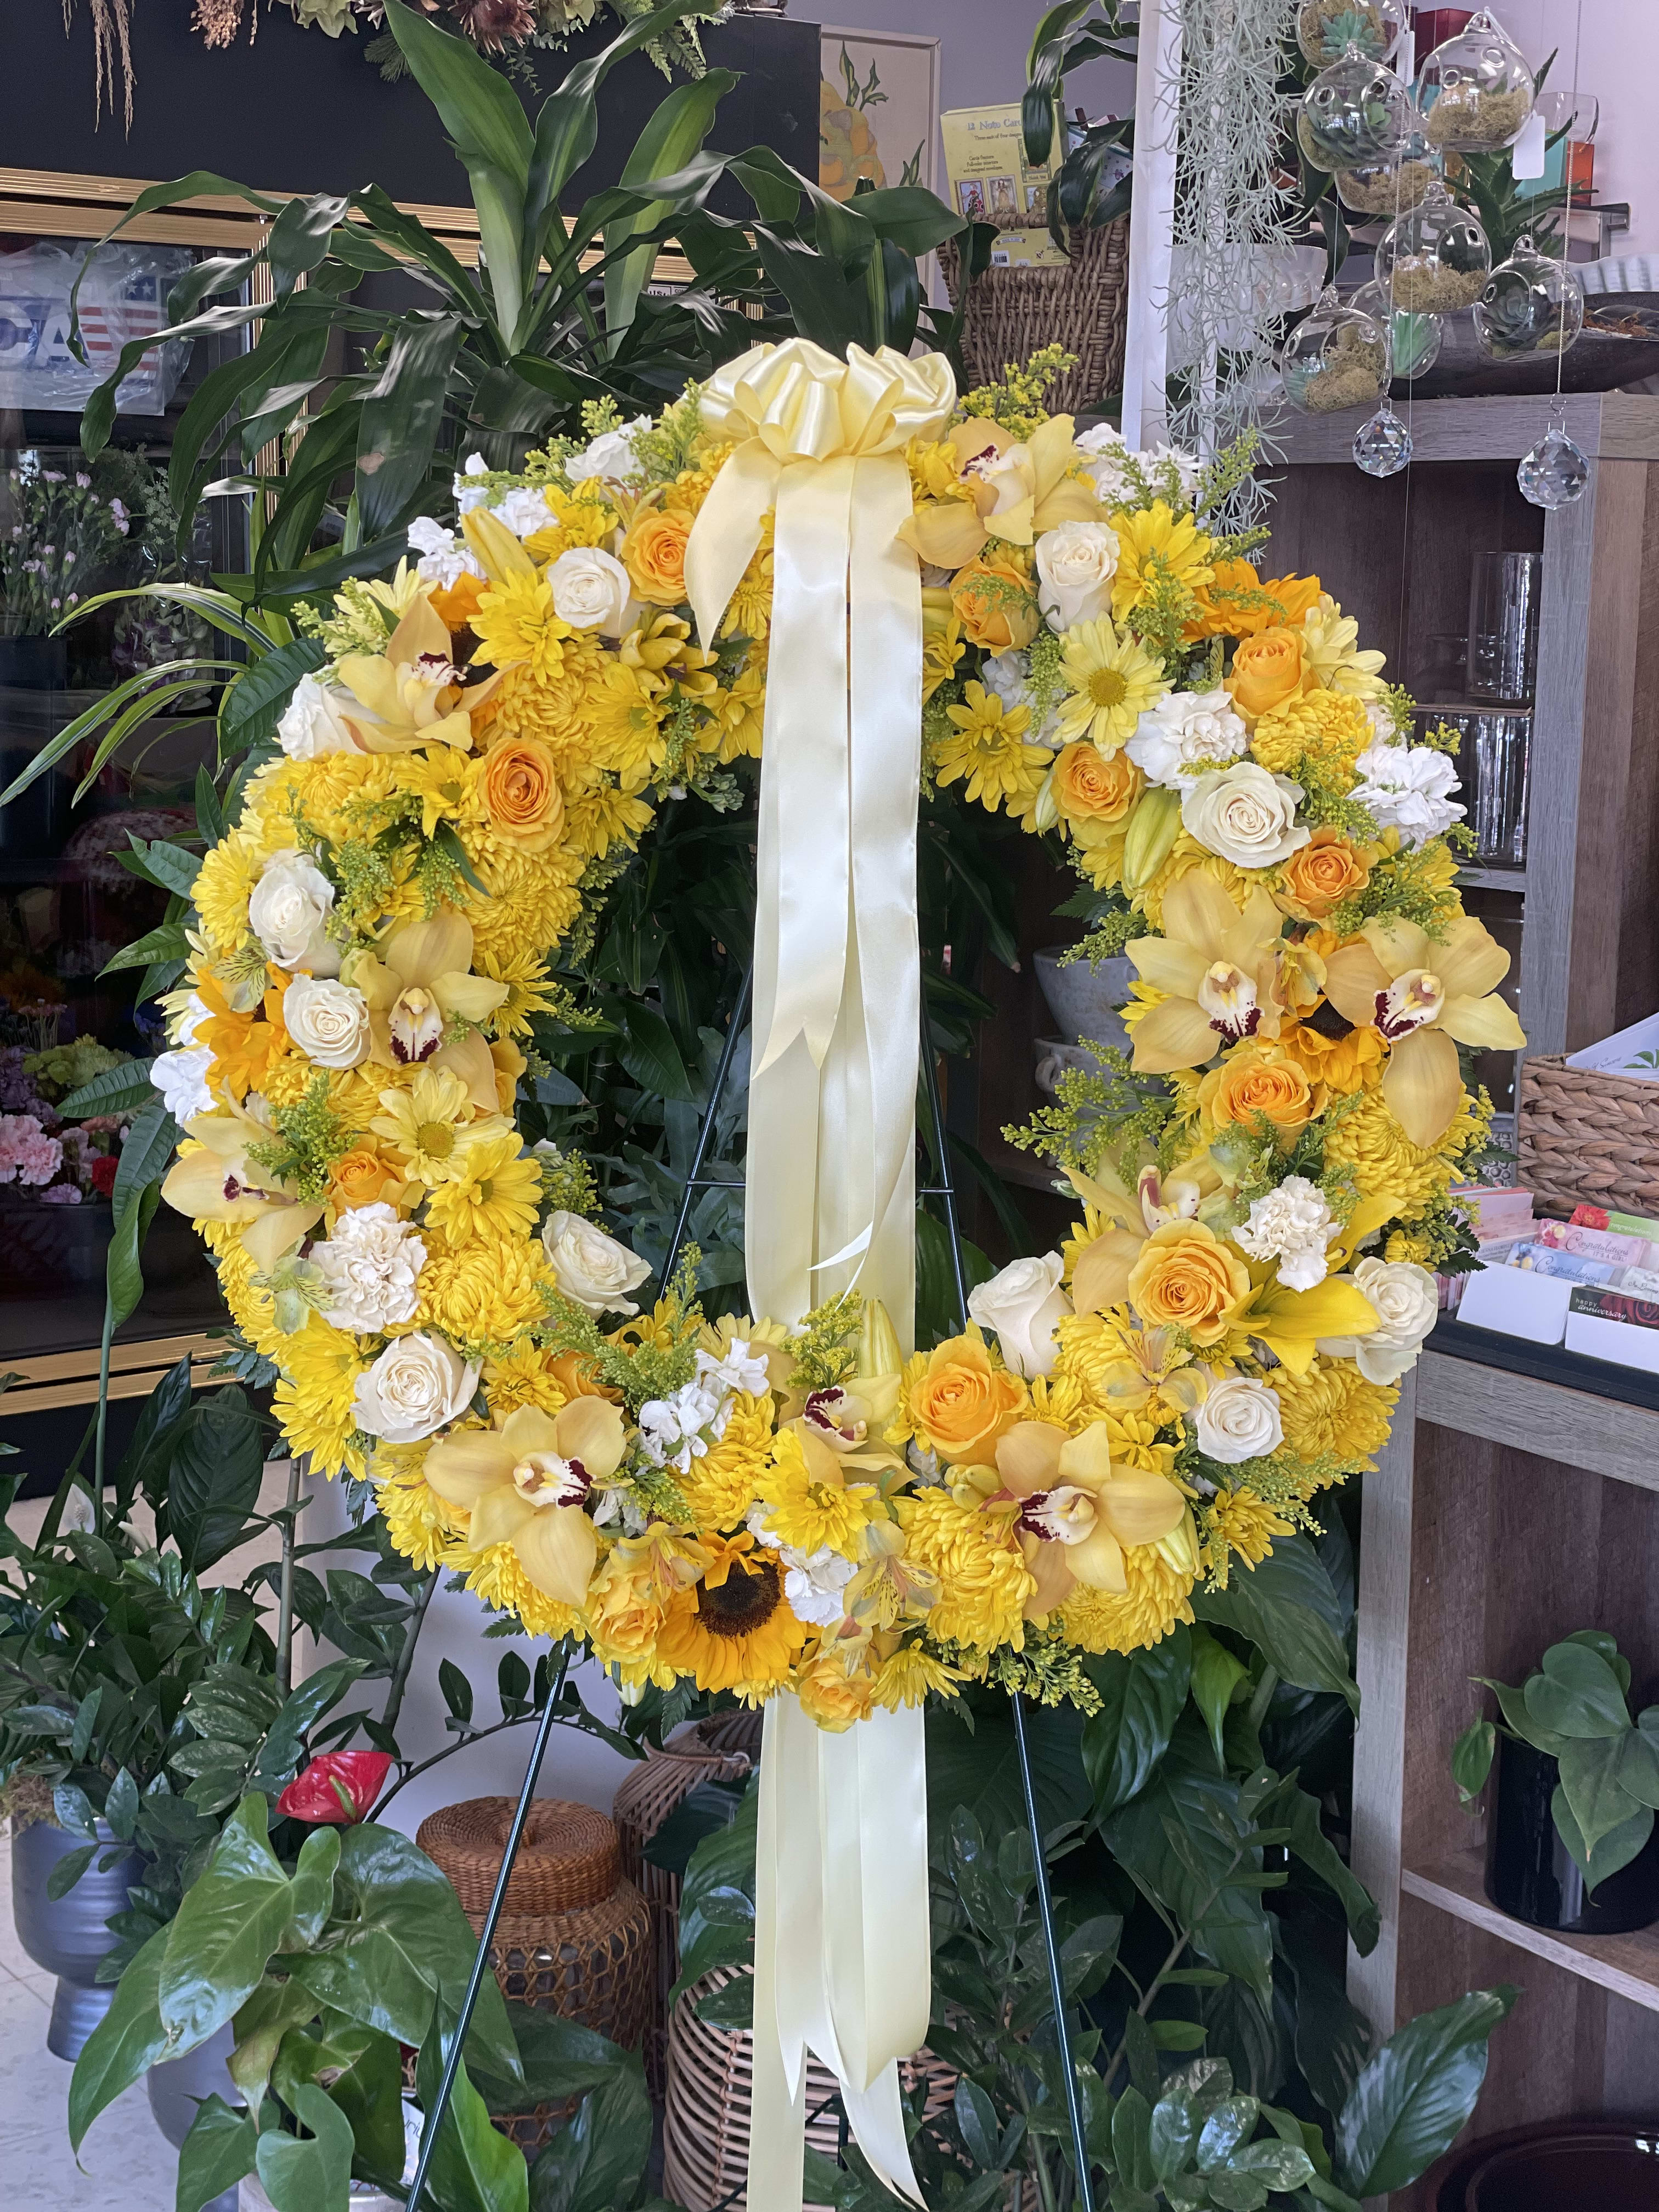 Eternal Sunset - A combination of yellow and white flowers such as roses, cymbidium orchids, sunflowers, daisy, carnations and solidago. 